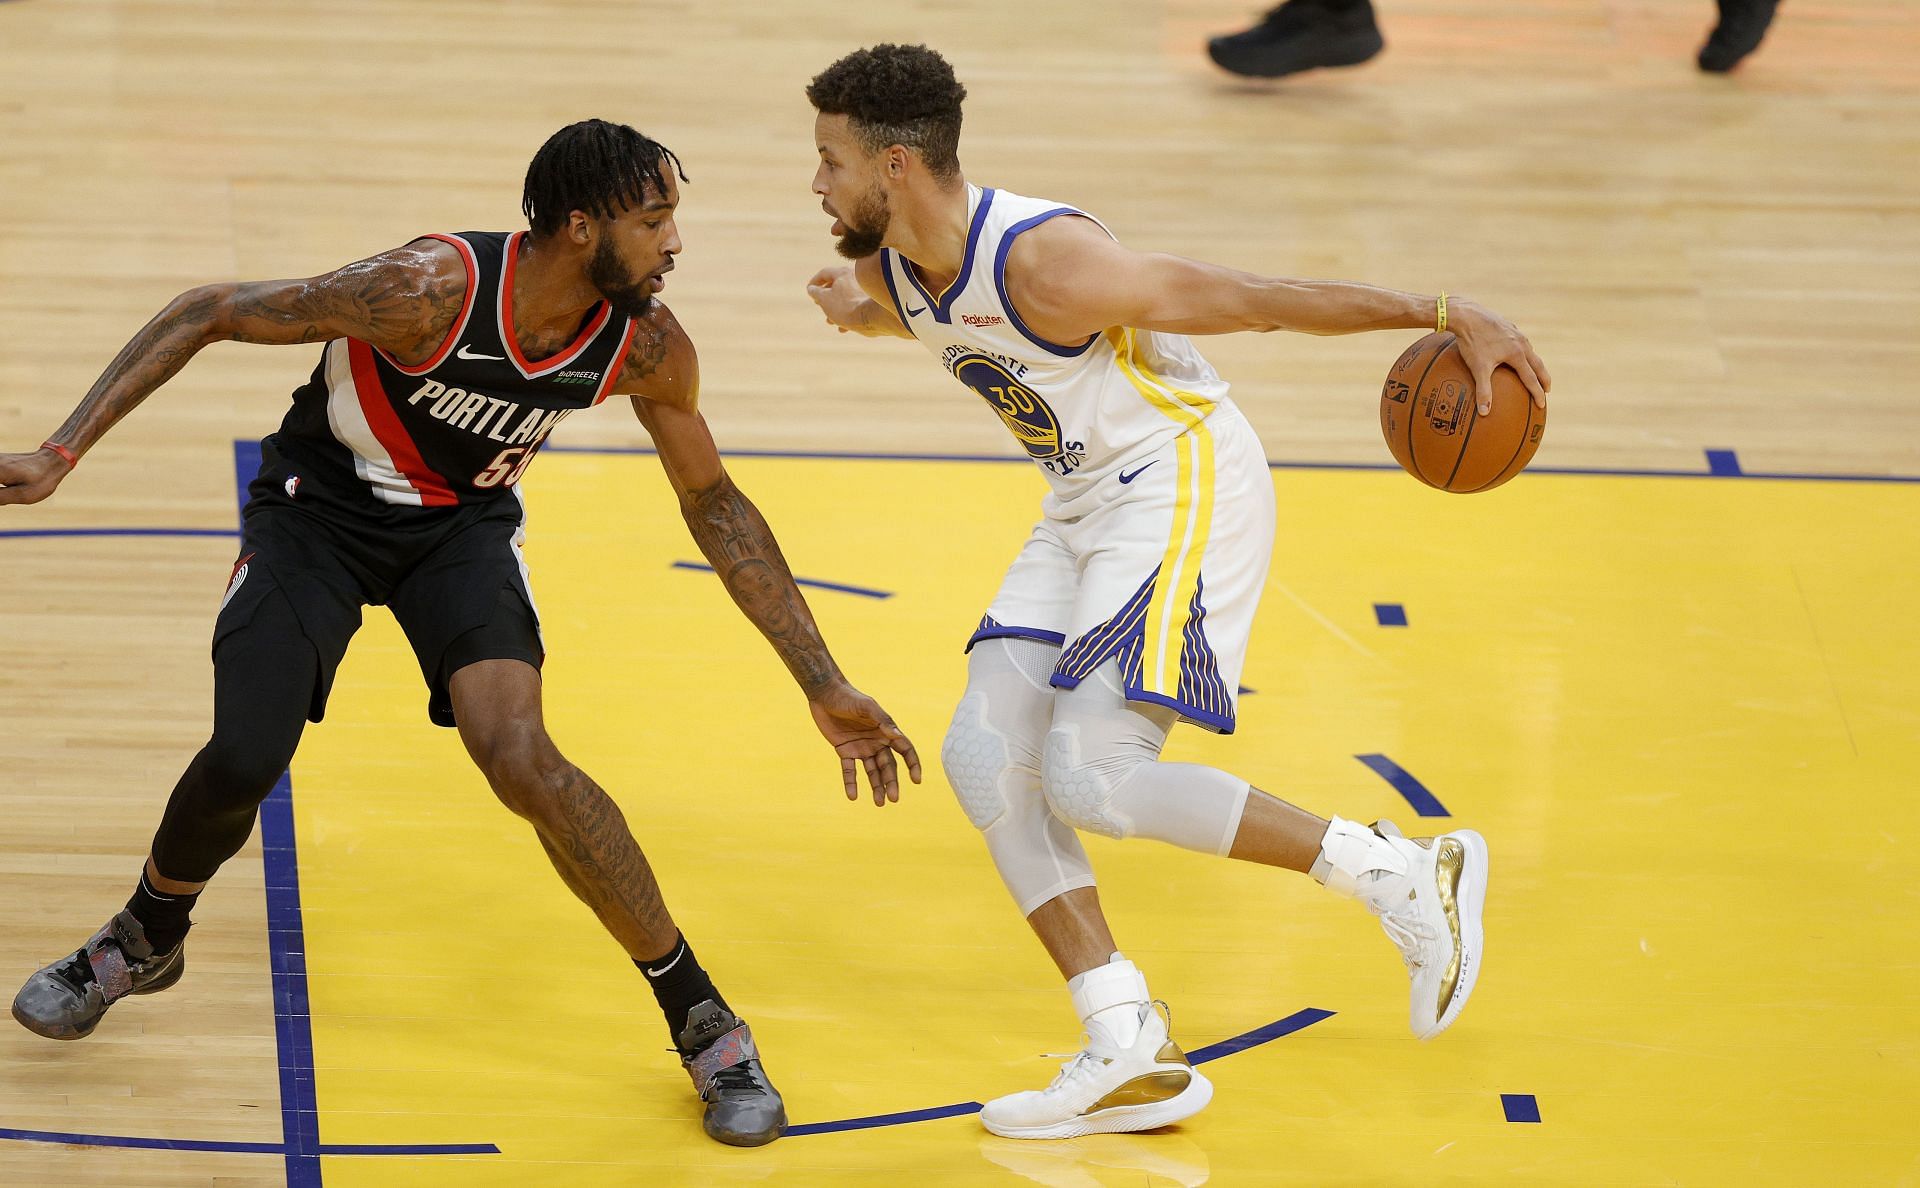 A snap from a game between the Portland Trail Blazers and the Golden State Warriors.